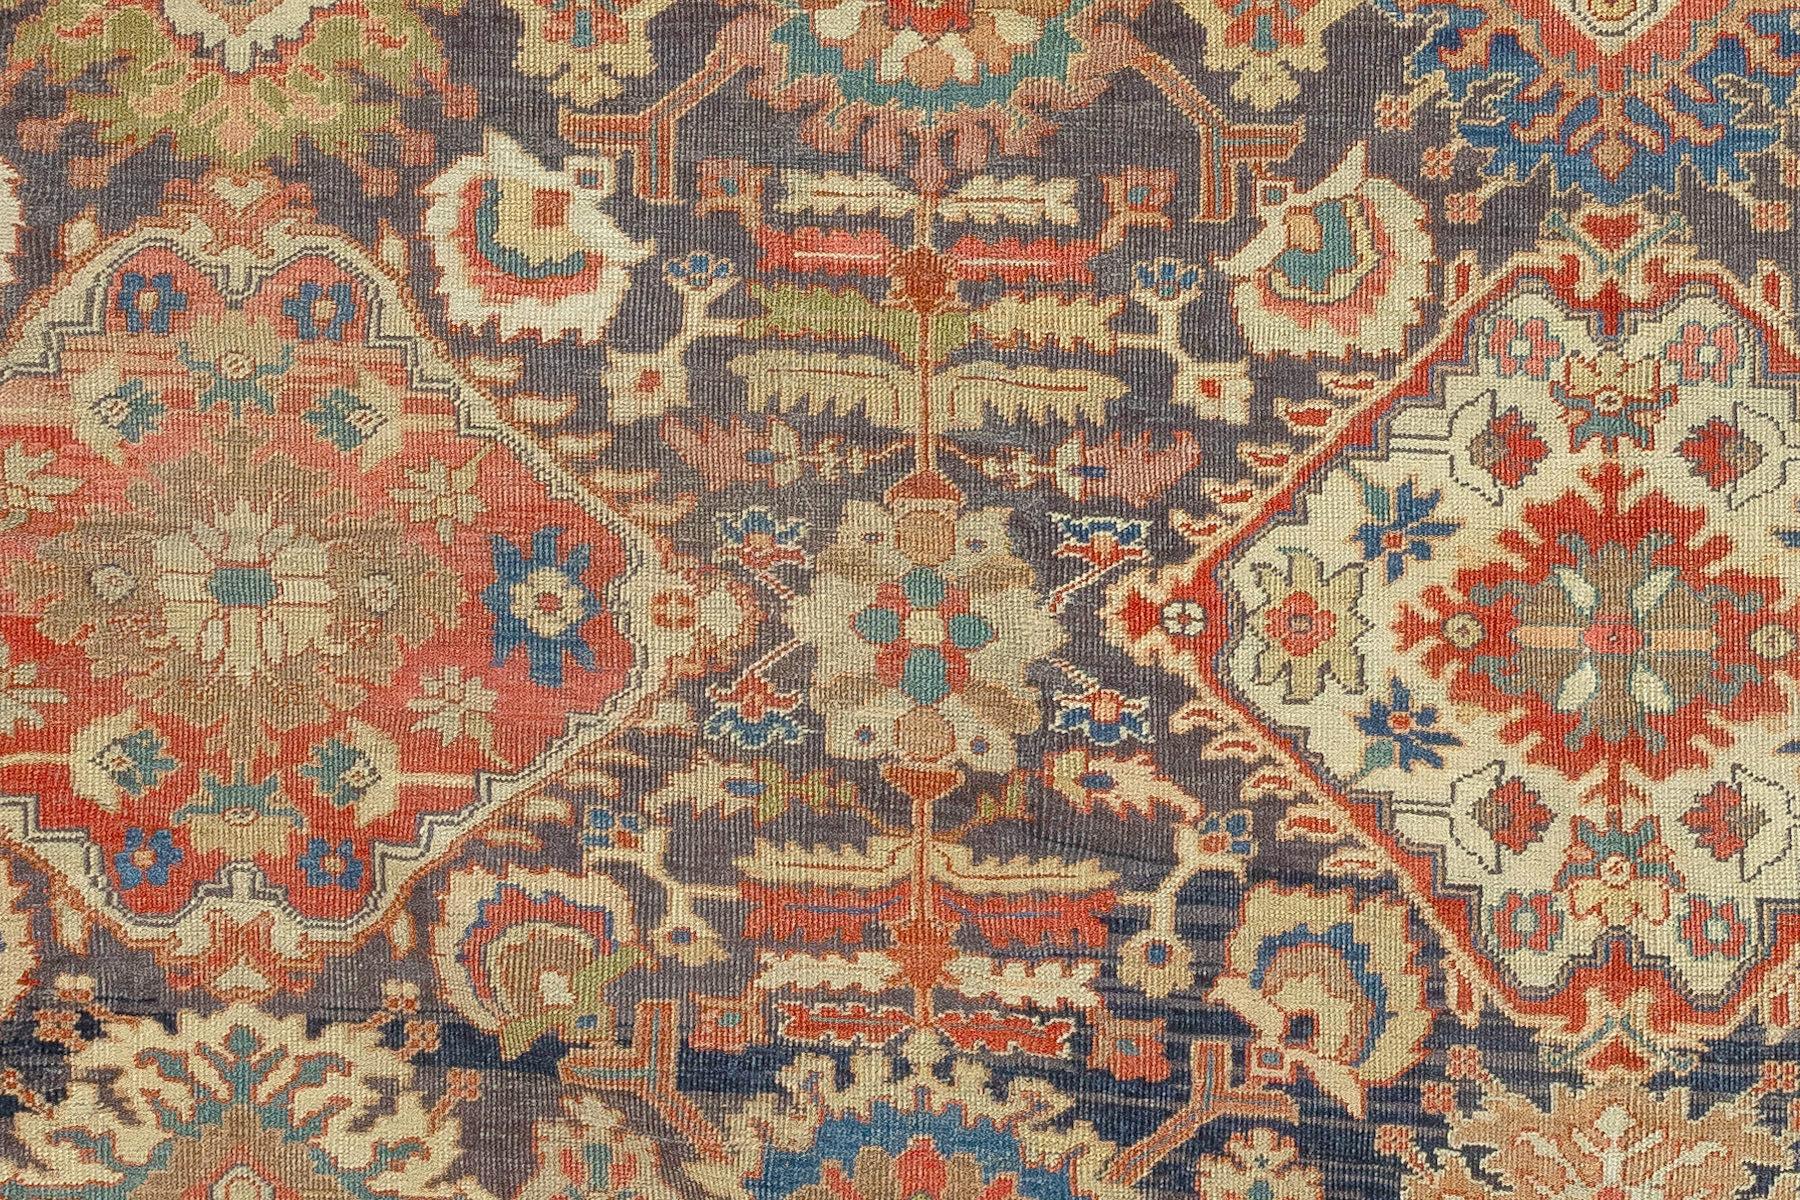 an early 20th Century Persian Mahal Antique Oversize Rug

Details
rug no.	j1893
size	12'4